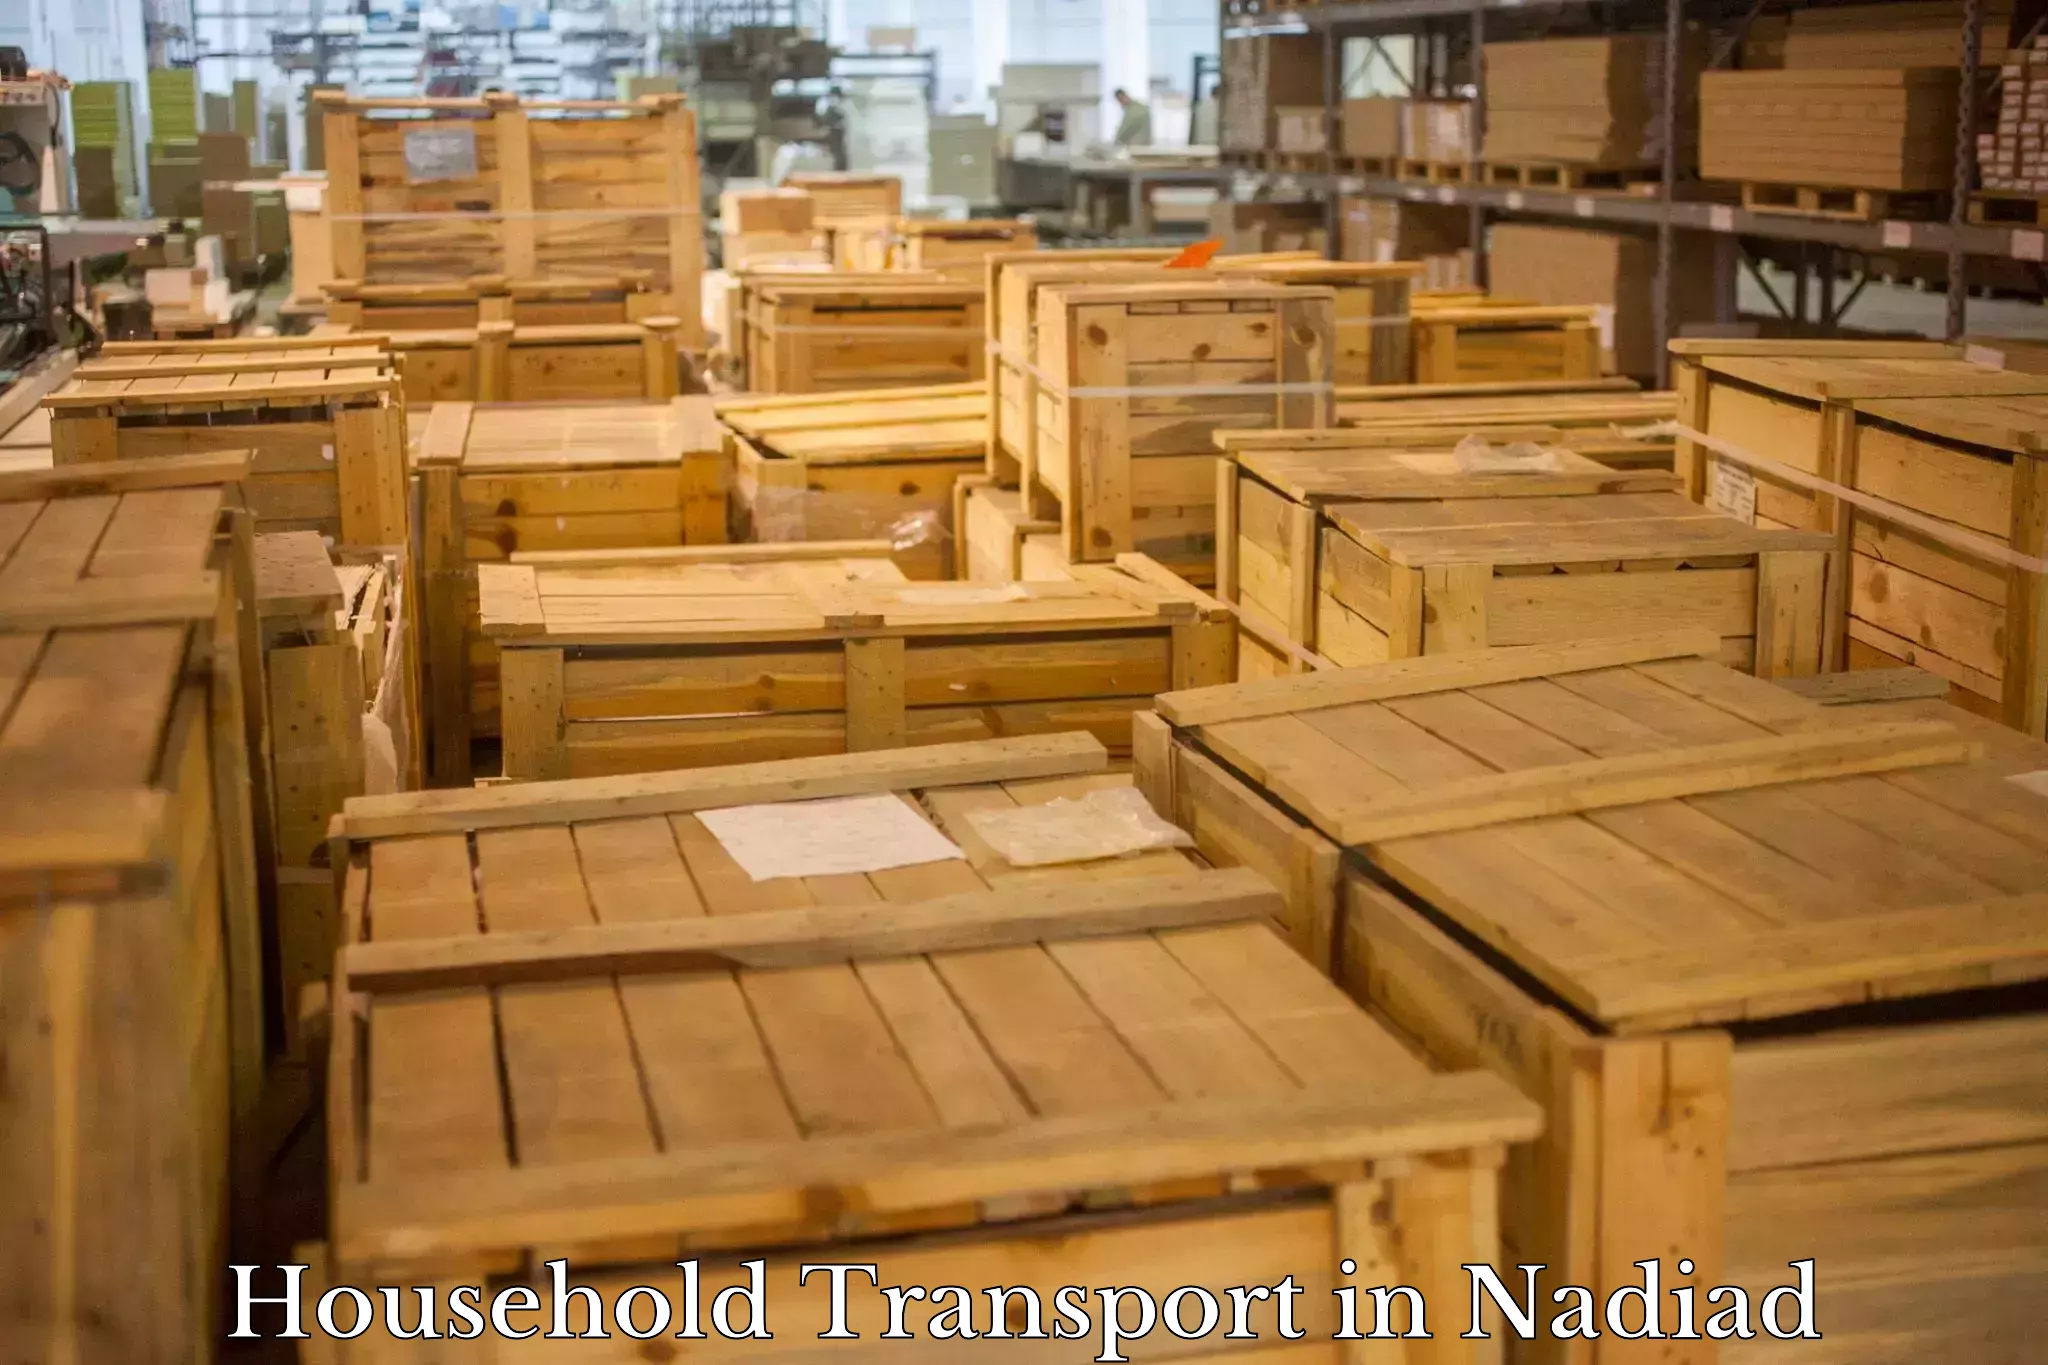 Household goods transport service in Nadiad